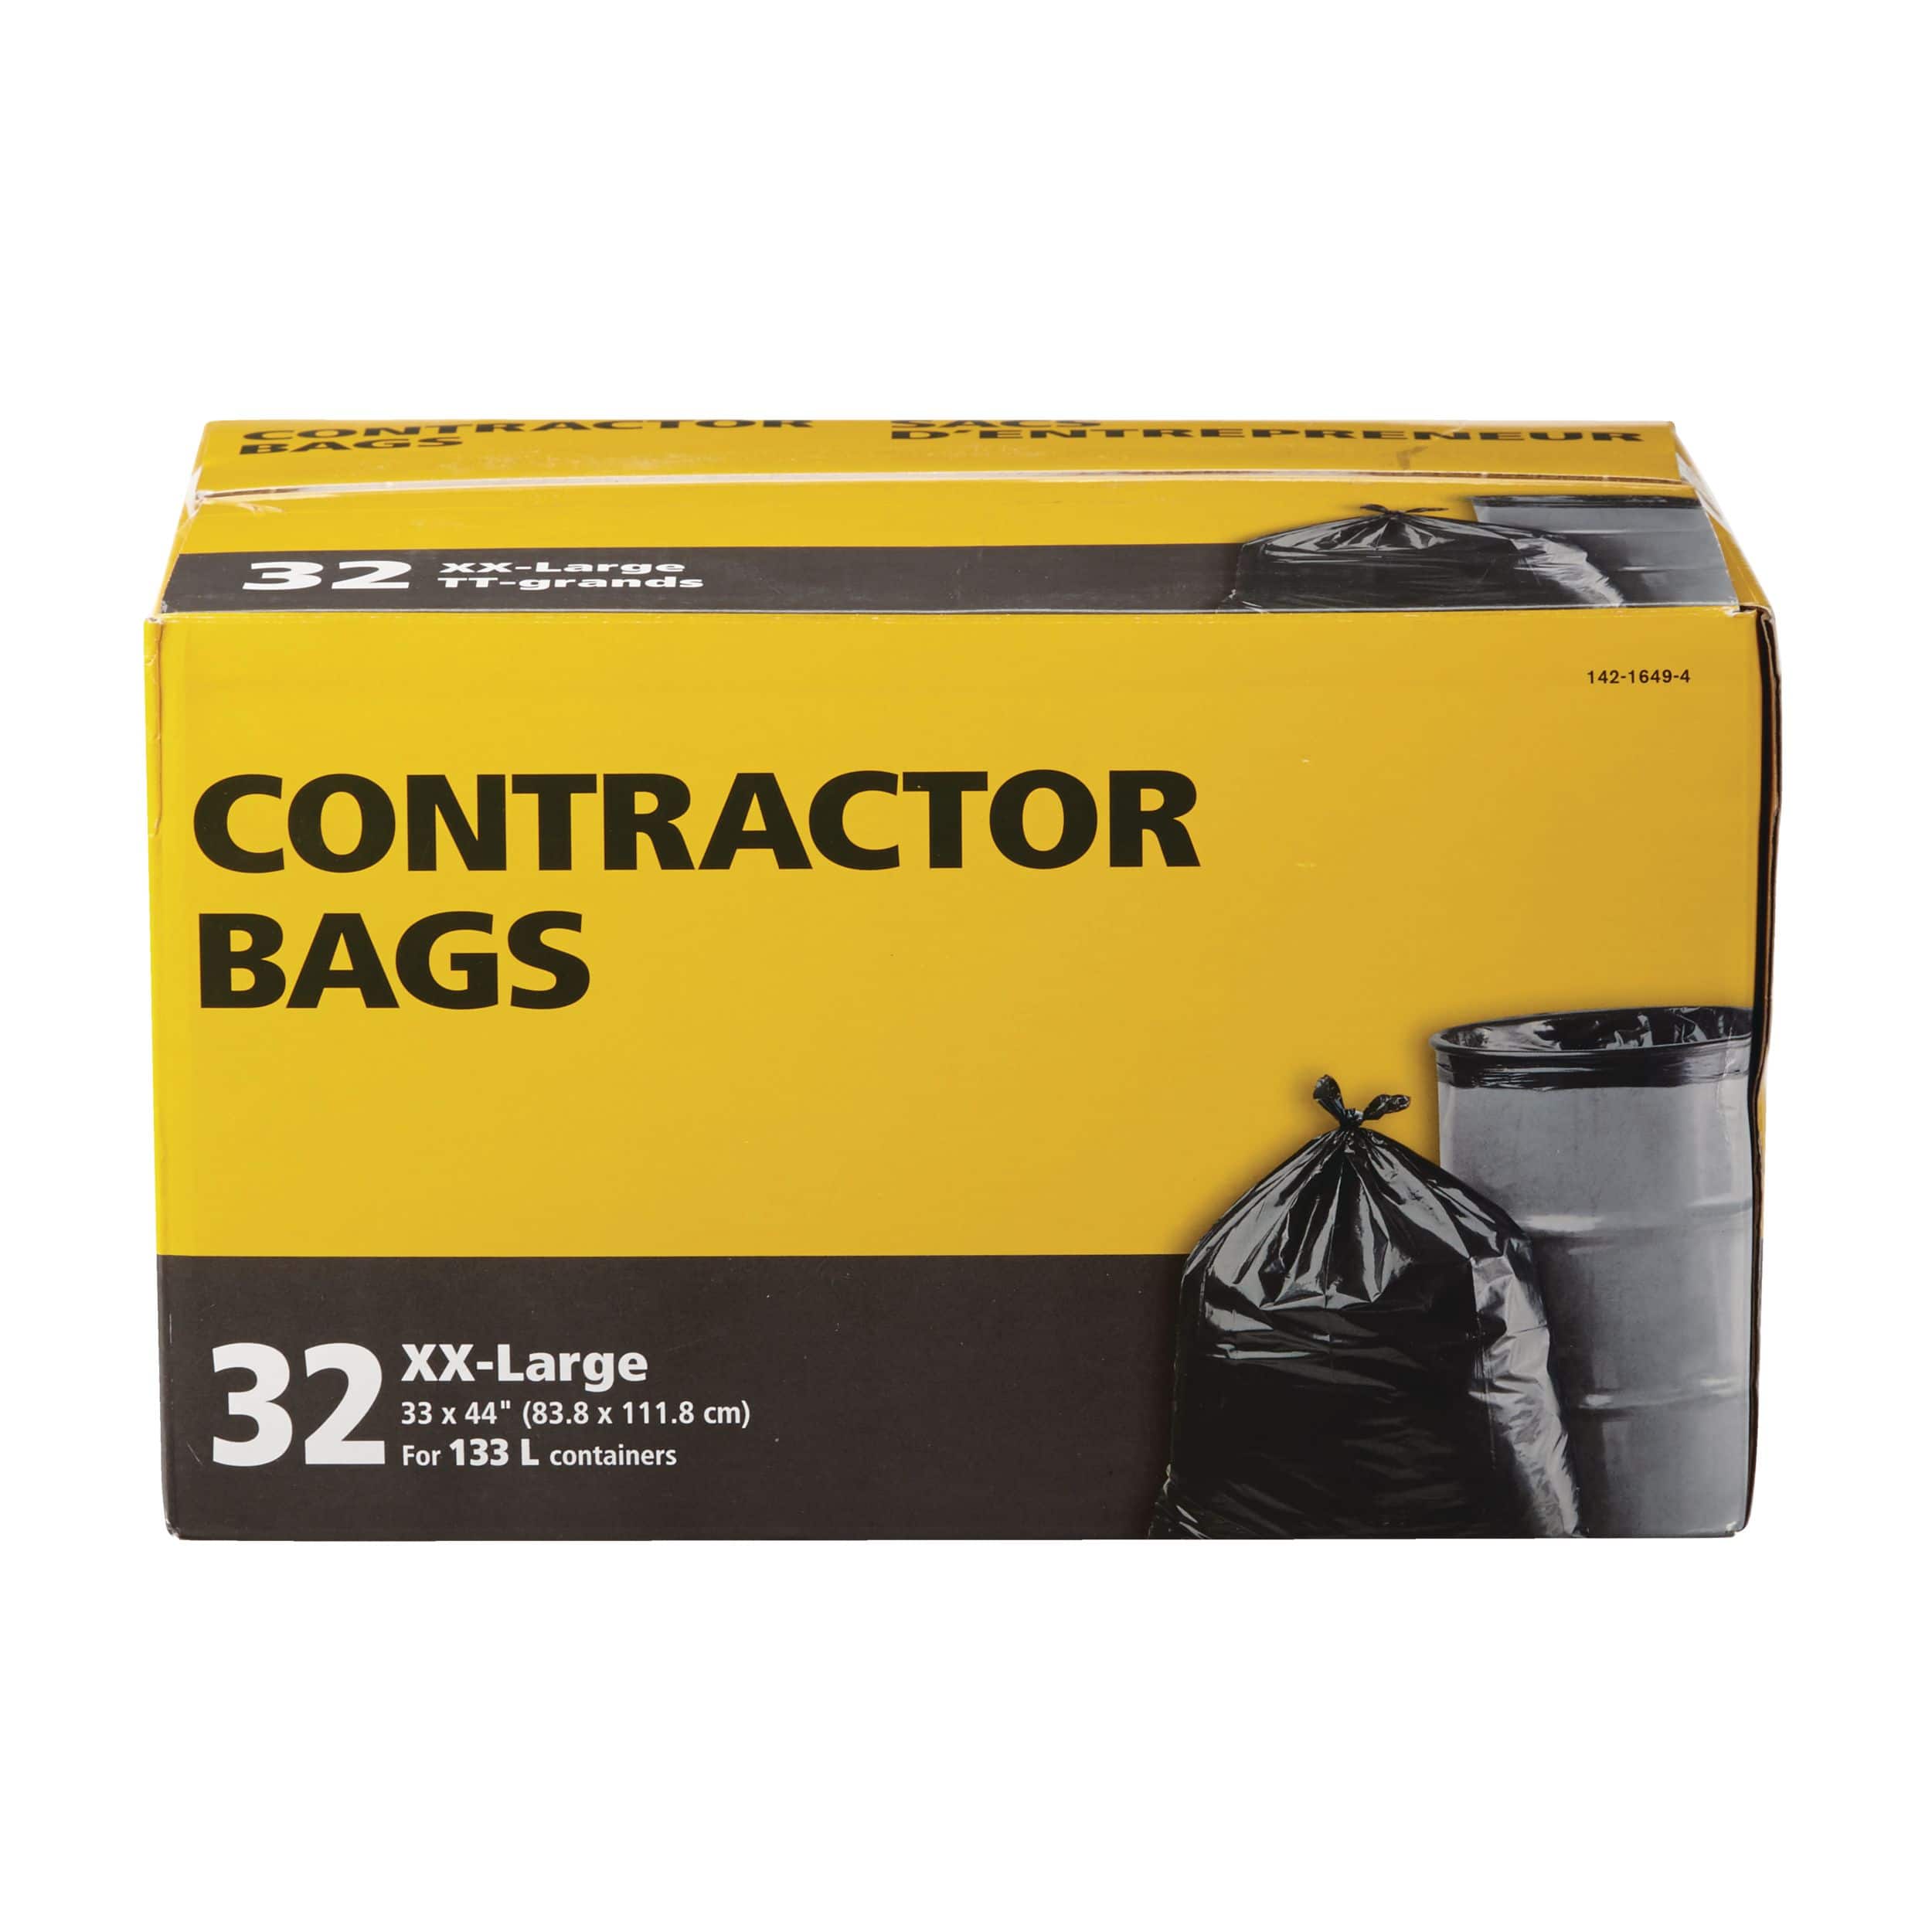 https://media-www.canadiantire.ca/product/living/cleaning/refuse-bags/1421649/133-litres-contractor-bags-32-count-c3ef26b6-603f-4103-8aa1-f22eea82f4d1-jpgrendition.jpg